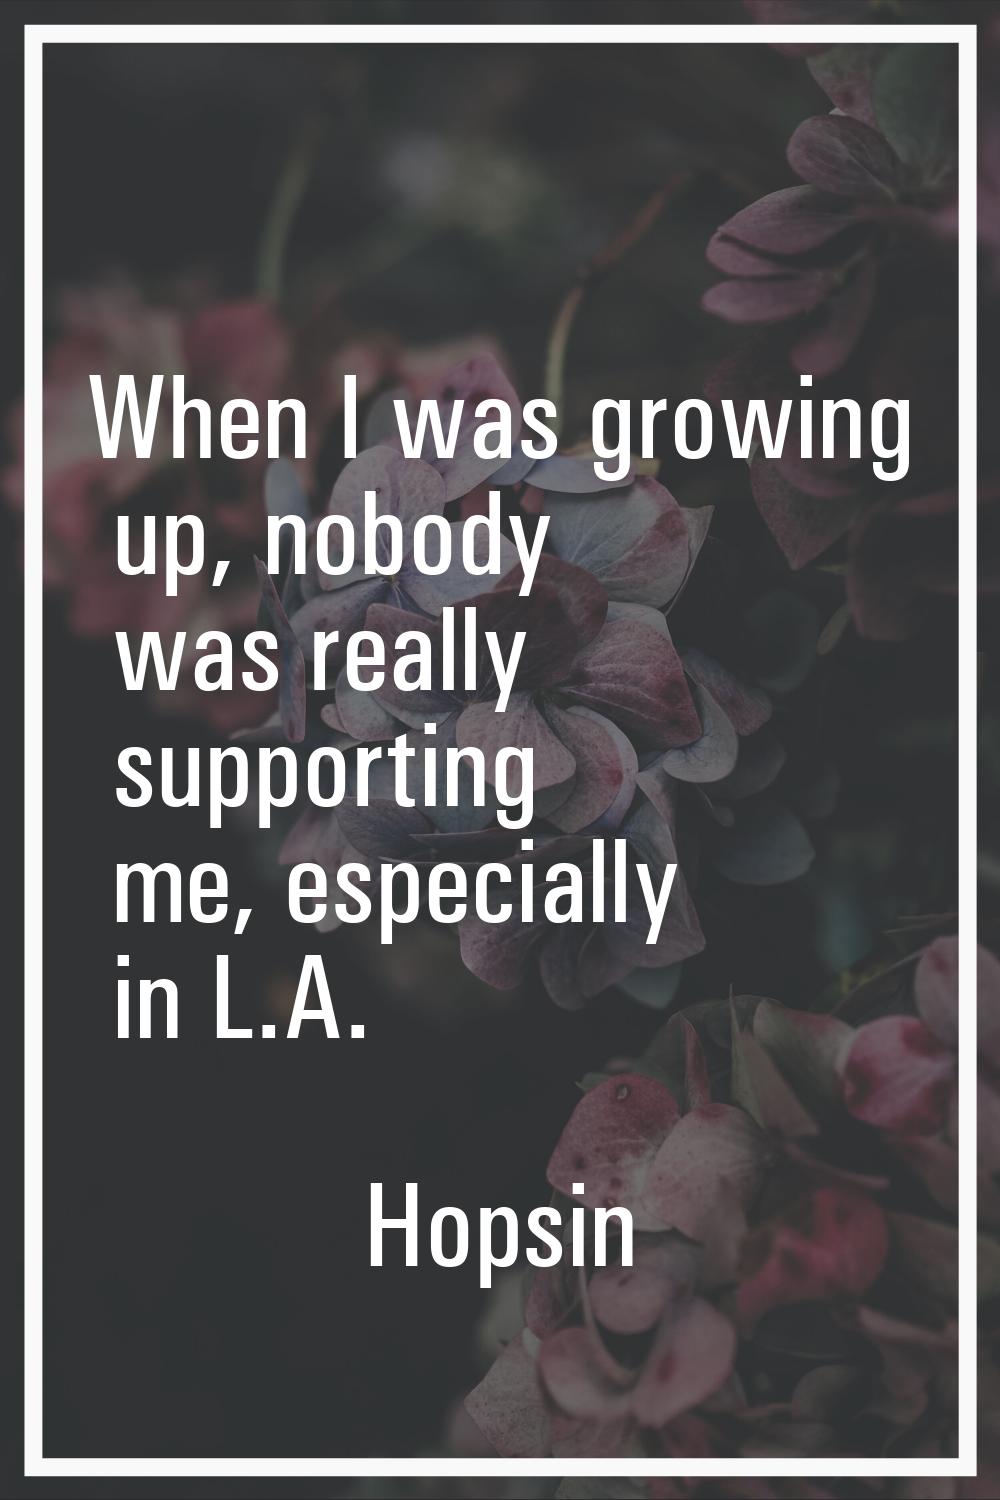 When I was growing up, nobody was really supporting me, especially in L.A.